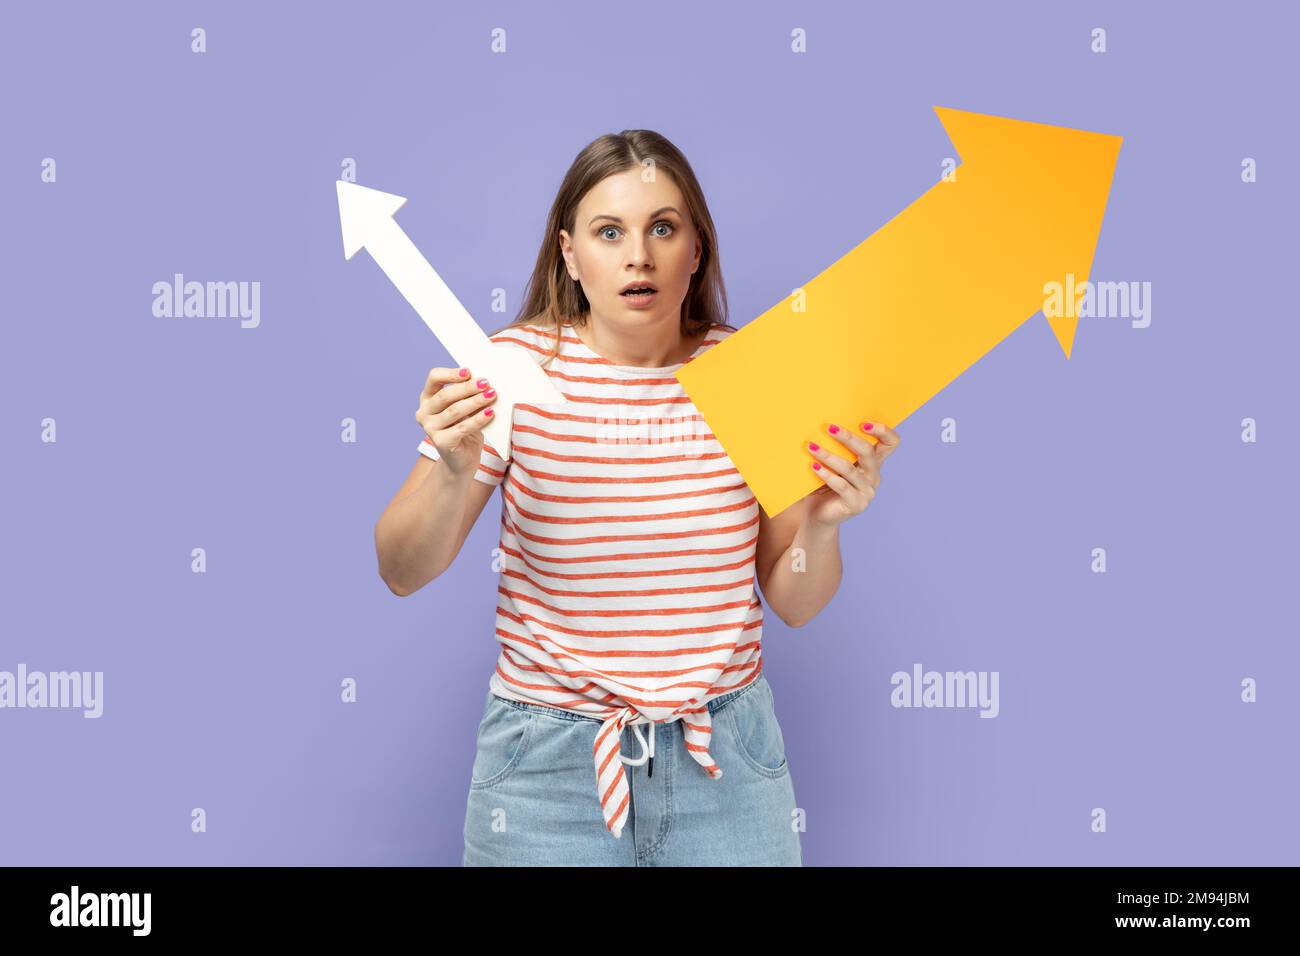 Portrait of shocked scared blond woman wearing striped T-shirt holding two arrows indicating to different sizes, looking at camera with big eyes. Indoor studio shot isolated on purple background. Stock Photo